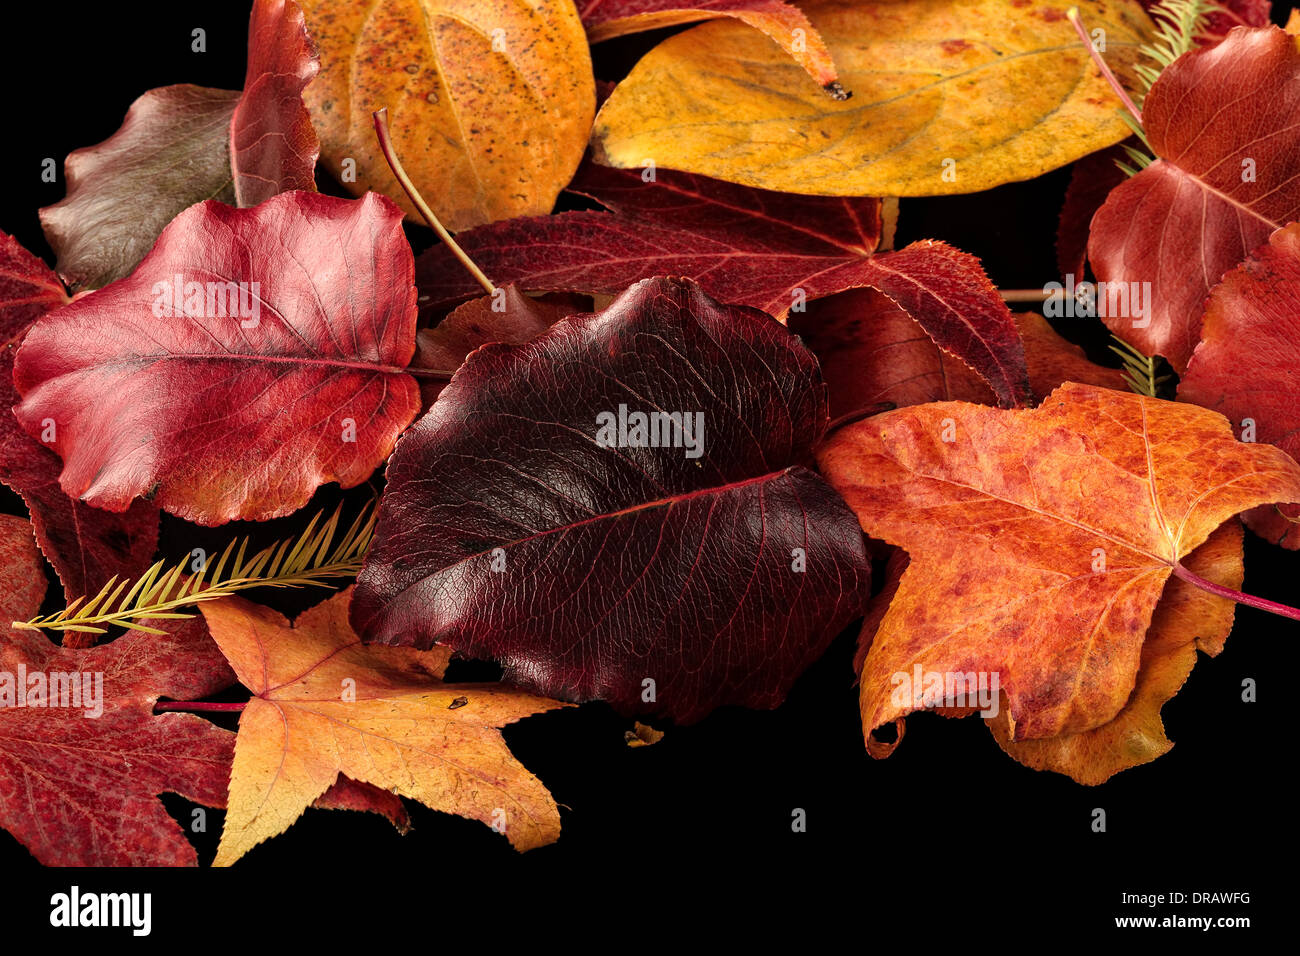 Colorful Fall / Autumn Leaves on a black background Stock Photo